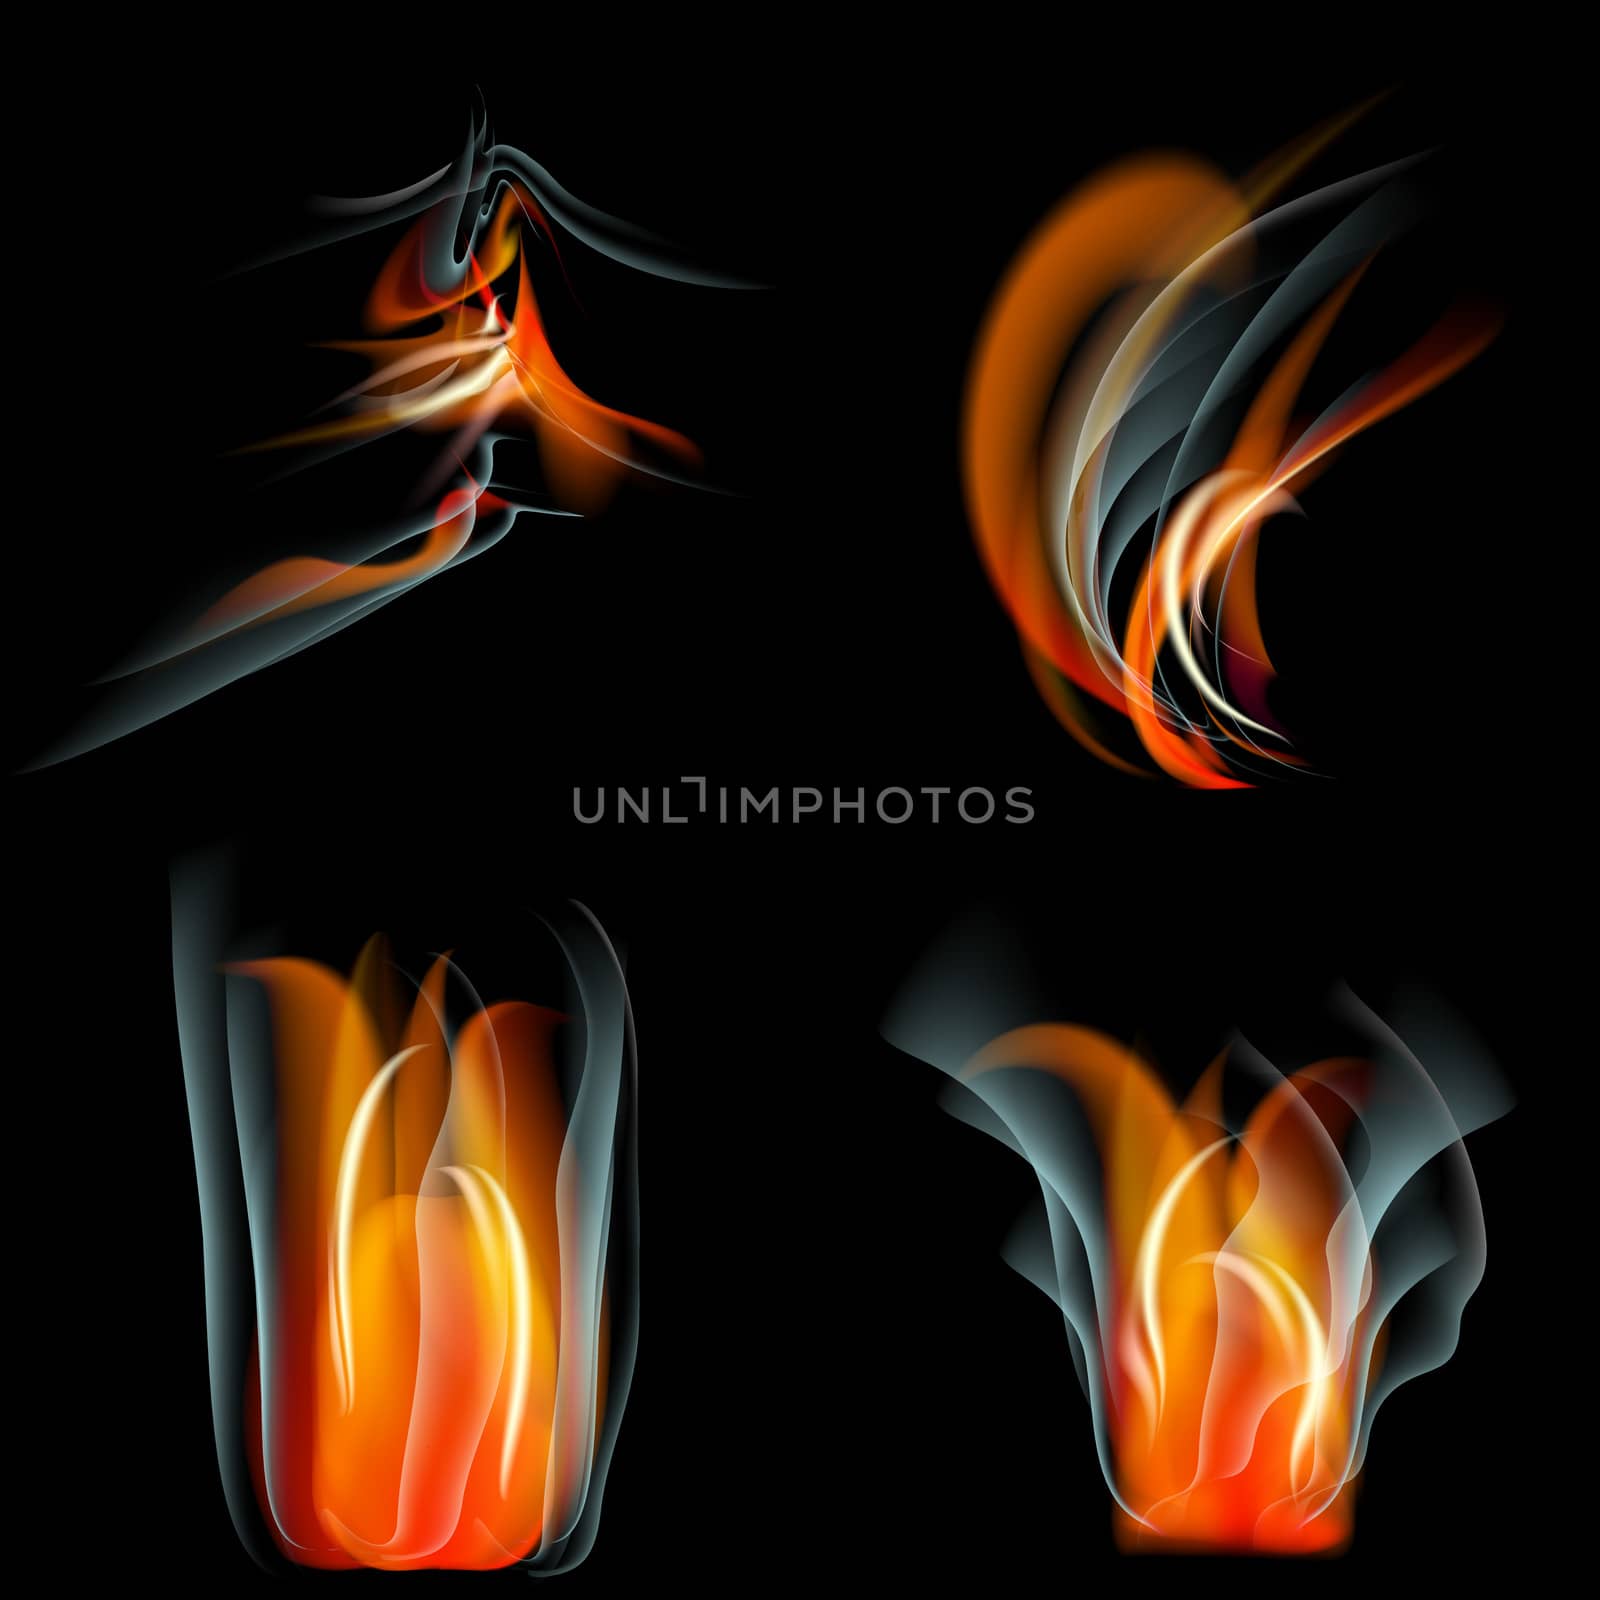 Collection of fires isolated on black background.  illustration